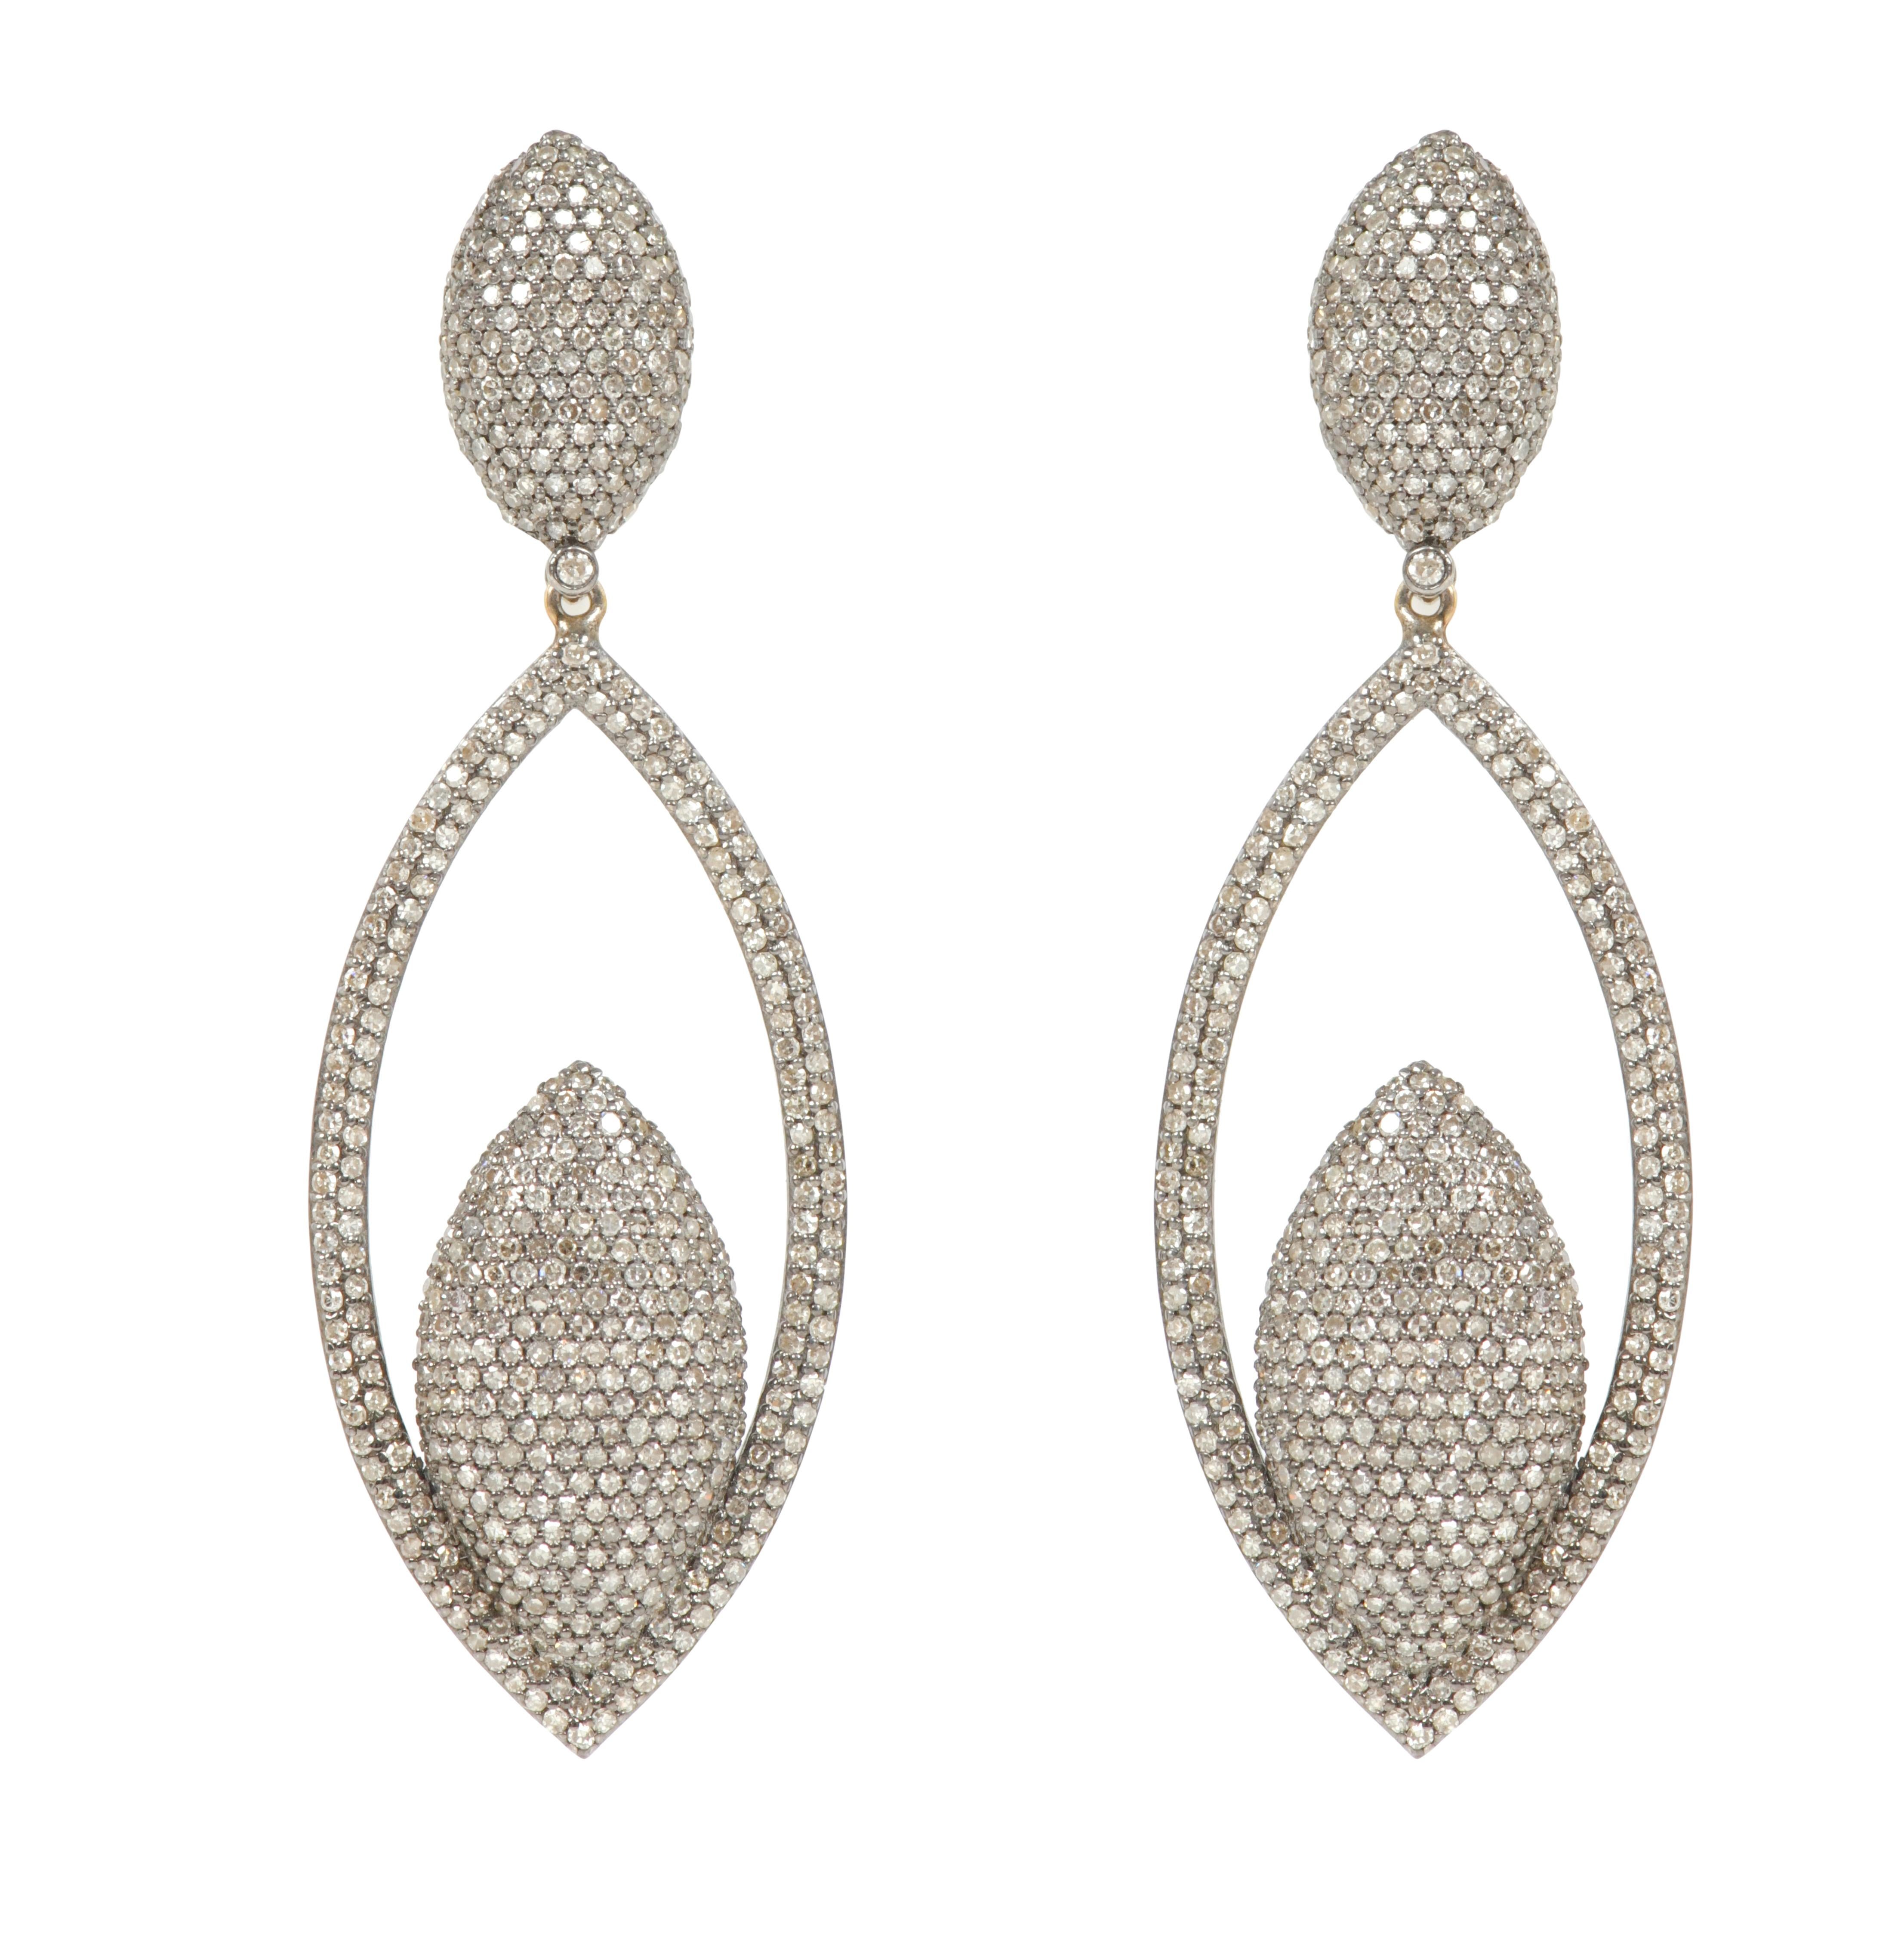 4.81 Carat Pave Diamond Cocktail Drop Earrings in Victorian Style For Sale 4